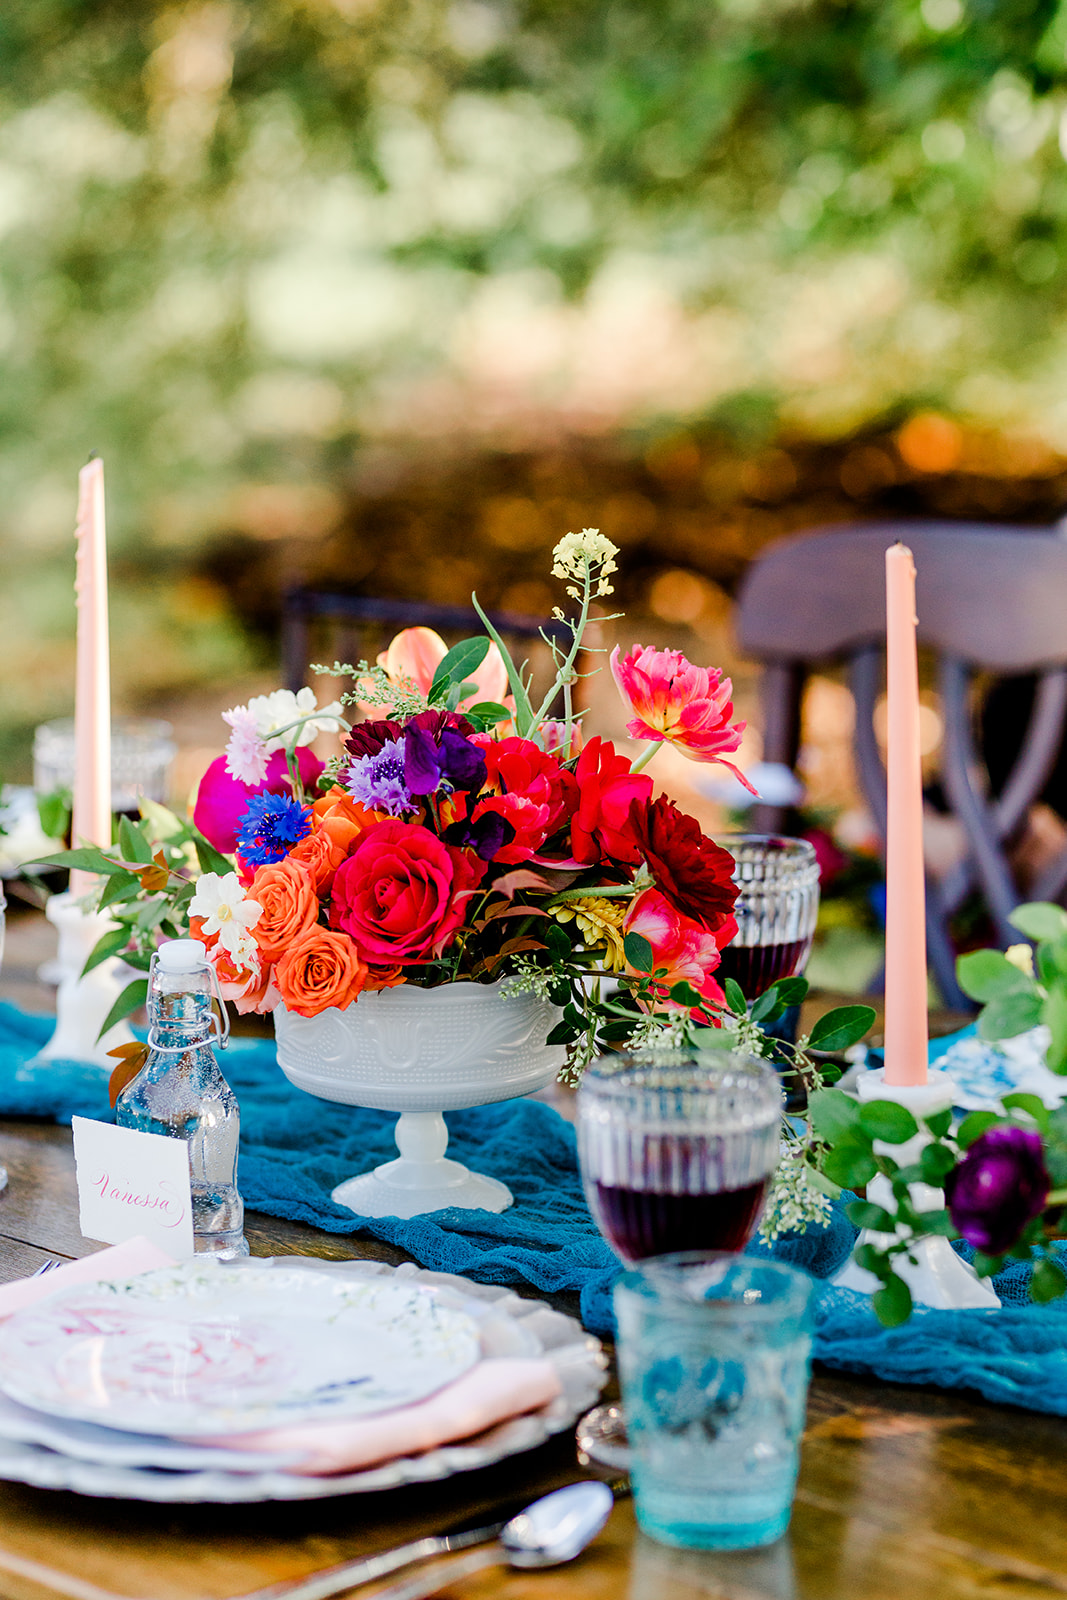 Bright + Cheerful Garden Elegance of Artmosphere — Tablescape and flowers from The Lost Garden